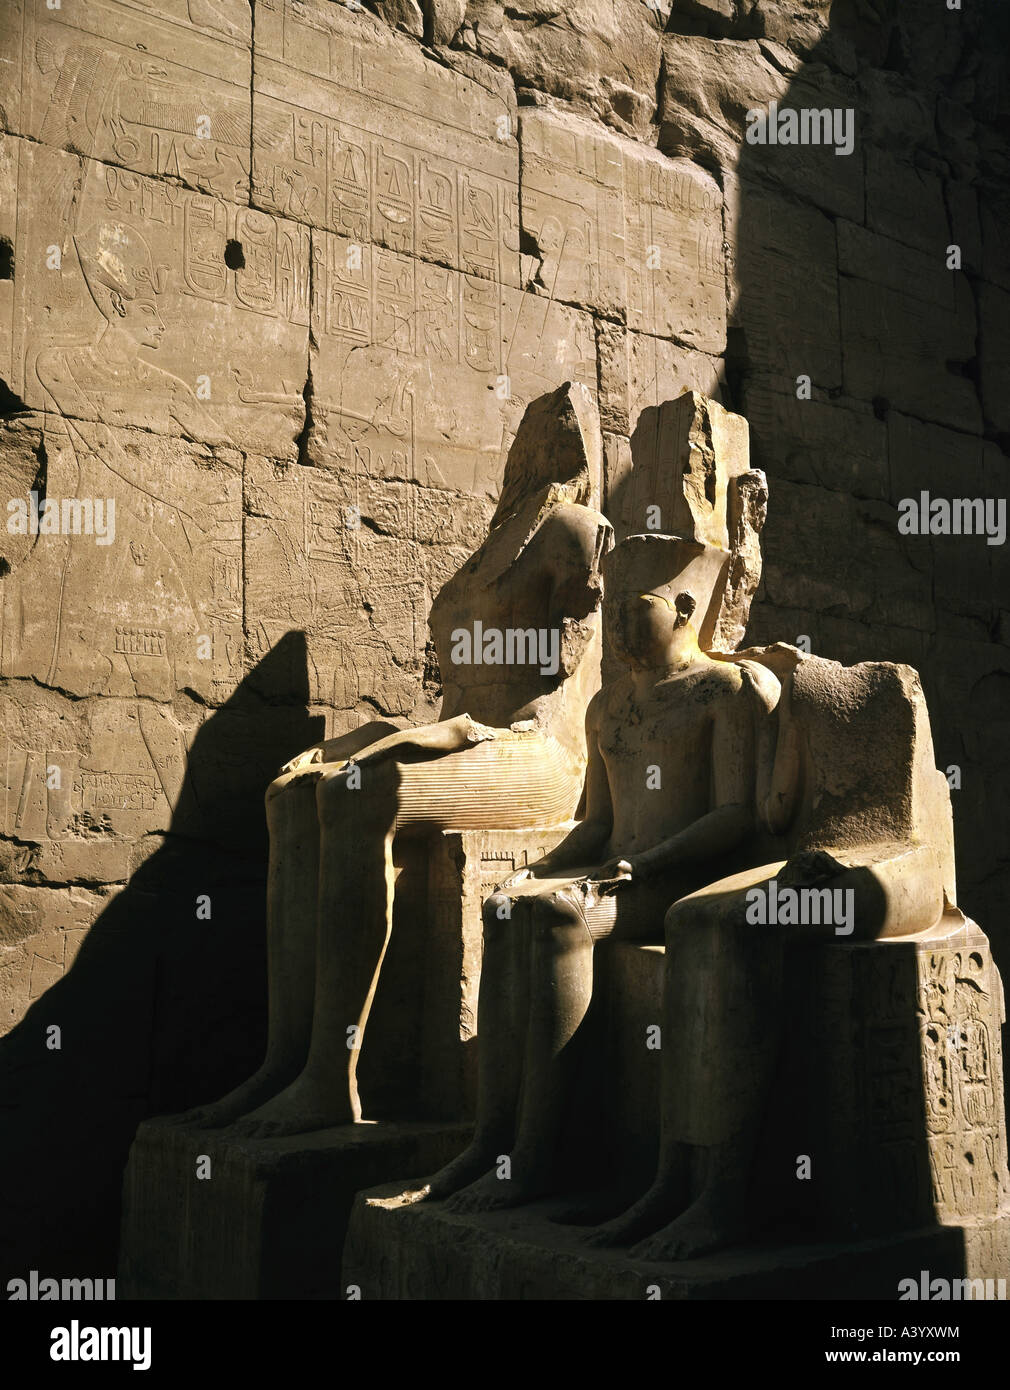 travel /geography, Egypt, Luxor, buildings, temple, Theban divine family Amun, Mut, Chons, exterior view, statue, rulers of 18th dynasty, architect Amenhotep son of Hapu, 1402 - 1364 B.C., extensions under Ramesses II, 1303 - 1236 B.C., historic, historical, Africa, architecture, temples, ancient world, New Kingdom, 18th / 19th dynasty, 15th - 13th century B.C., sculpture, sculptures, statues, sitting, child, ancient world, Stock Photo